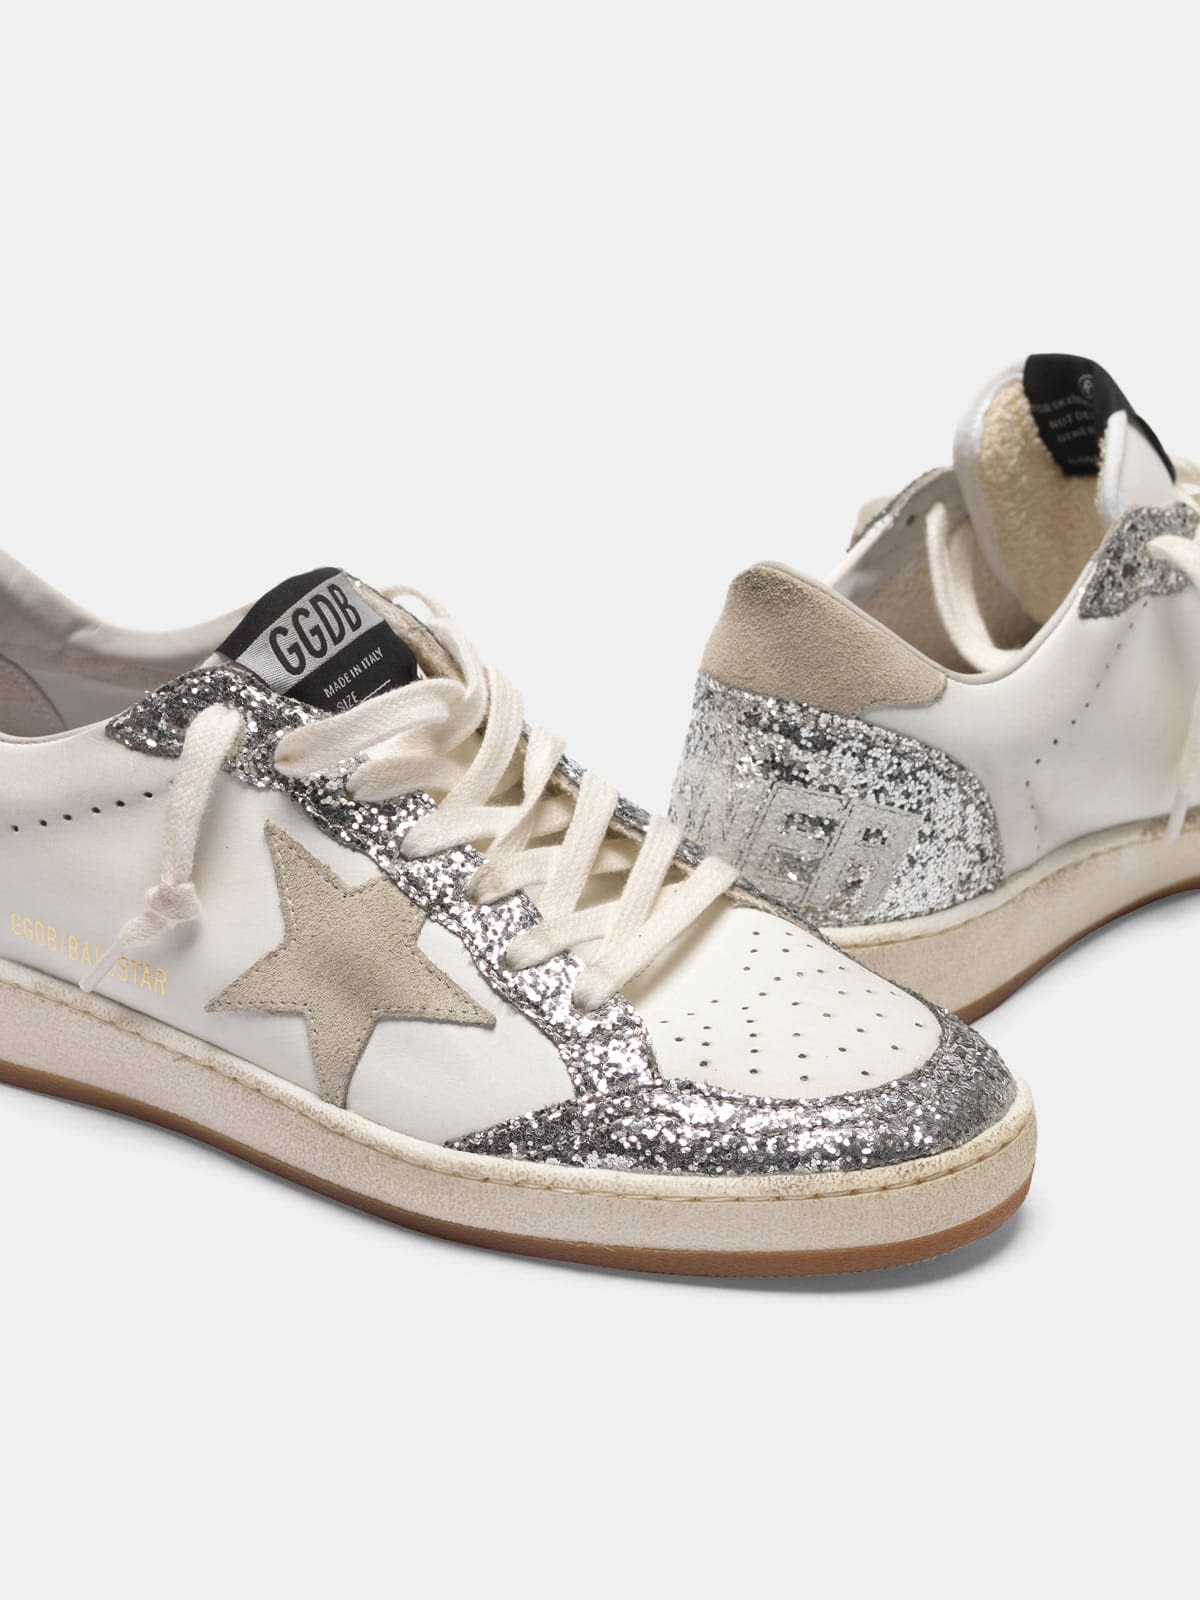 Ball Star sneakers in leather with glittery inserts